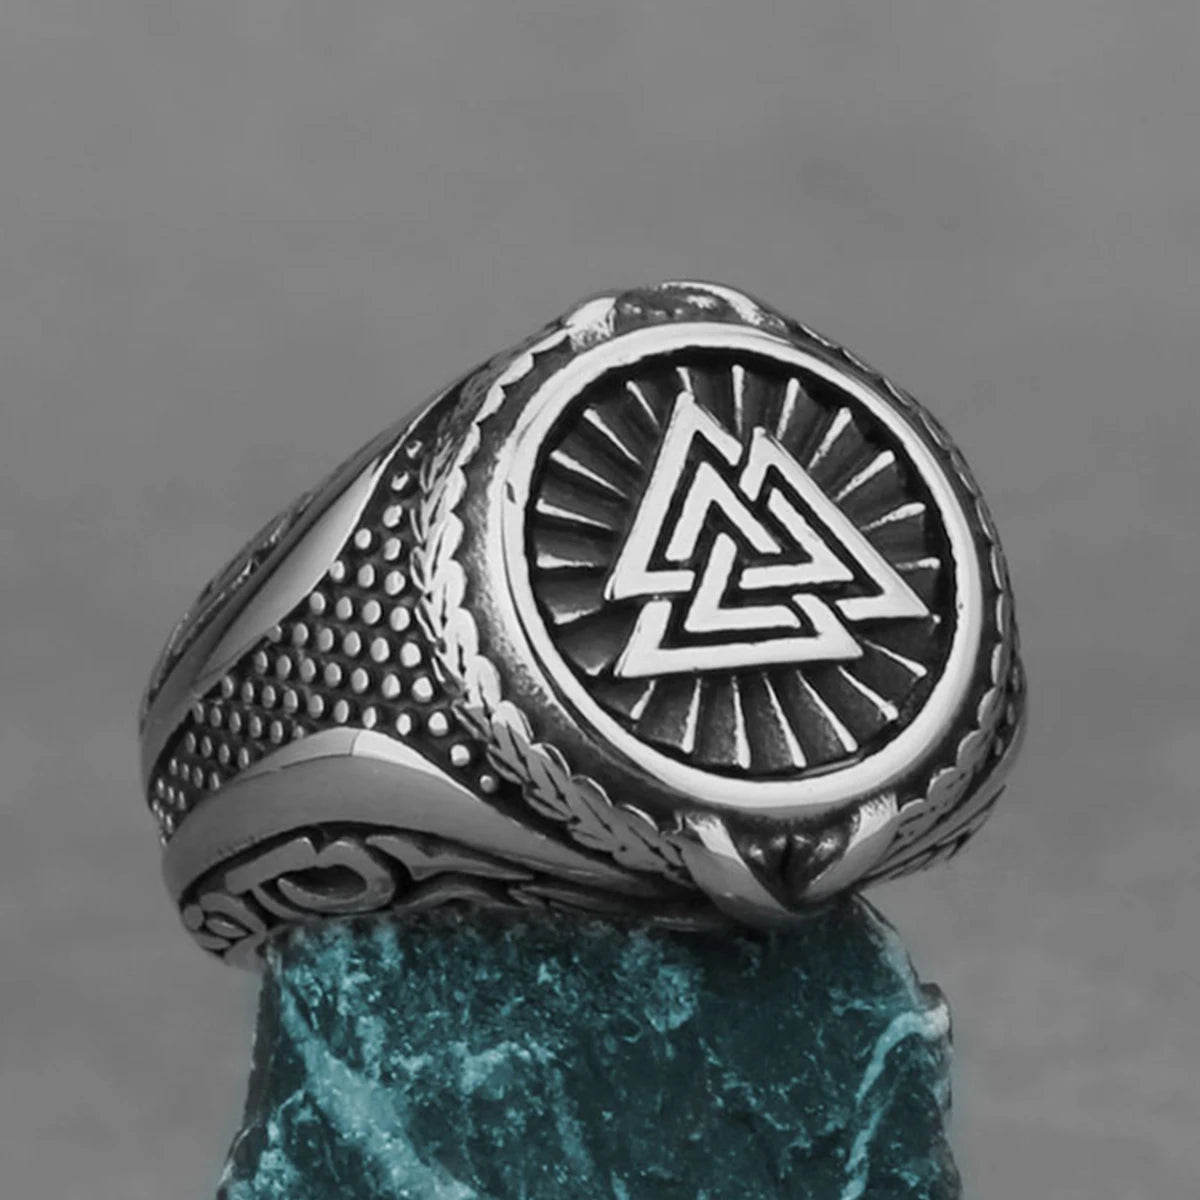 Nordic Viking Stainless Steel Ring - Anchor Compass Tree of Life Rune Amulet Wolf Finger Jewelry VK-6 Men's Rings